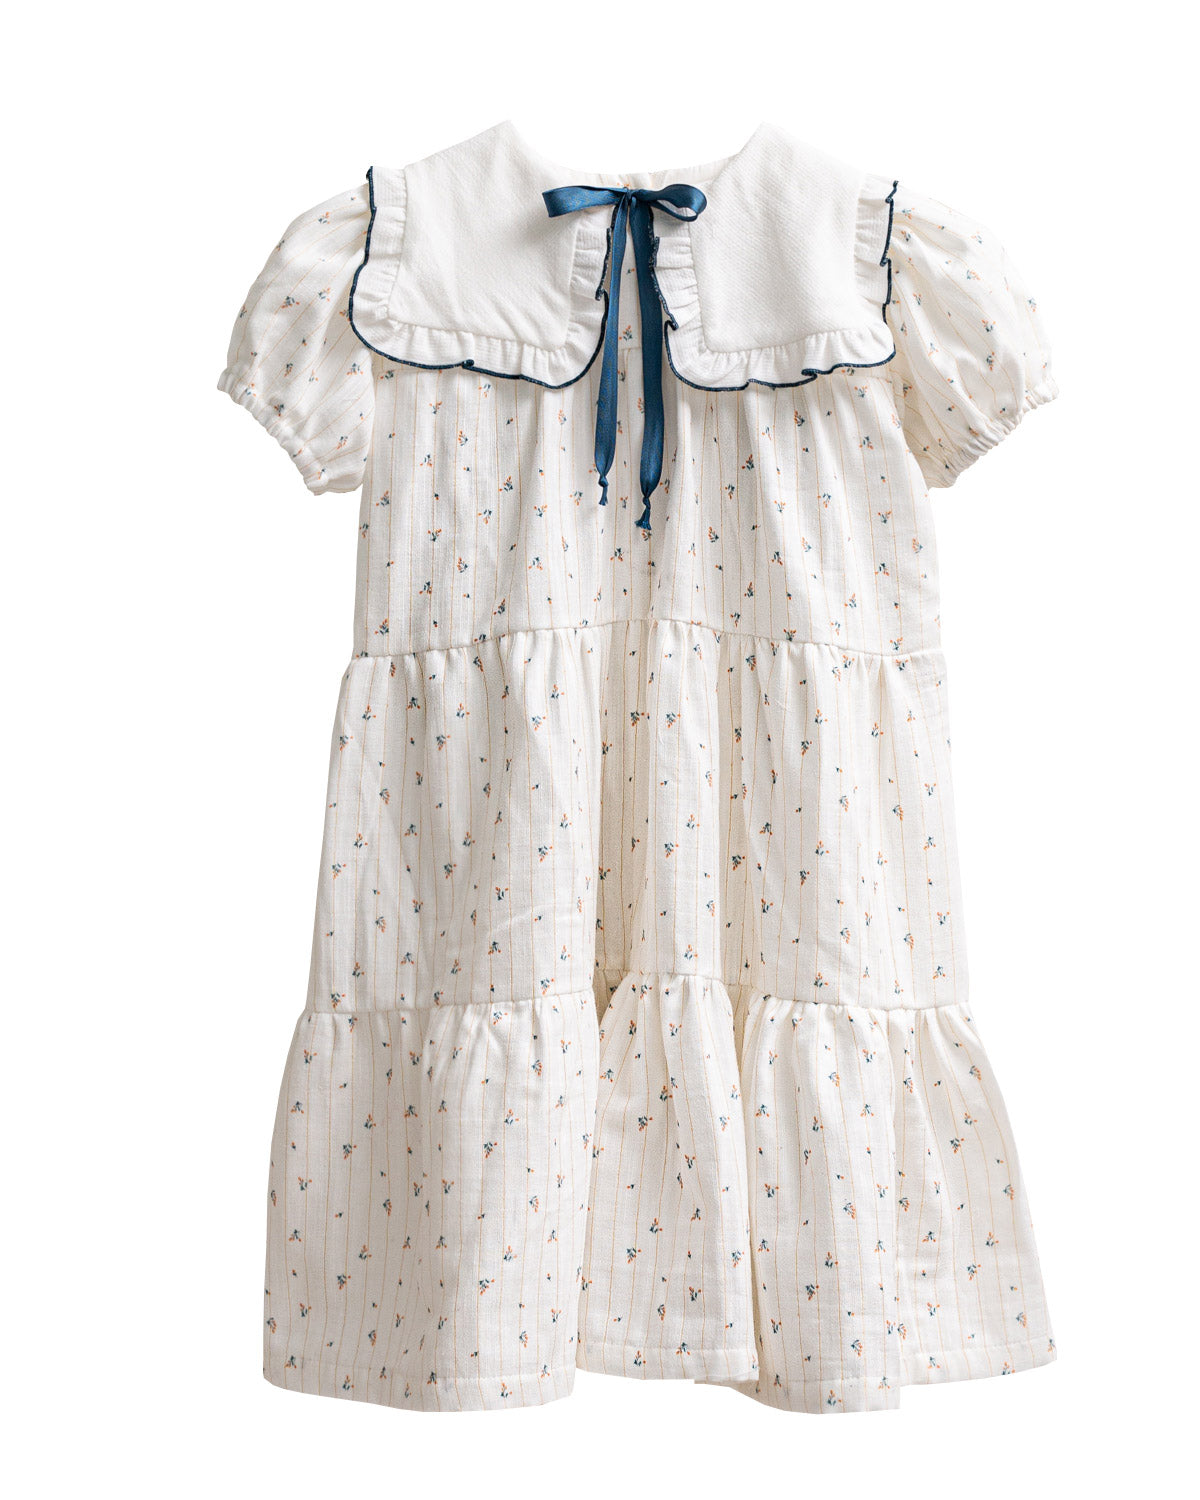 Cosmosophie Cream with Print Noral Dress